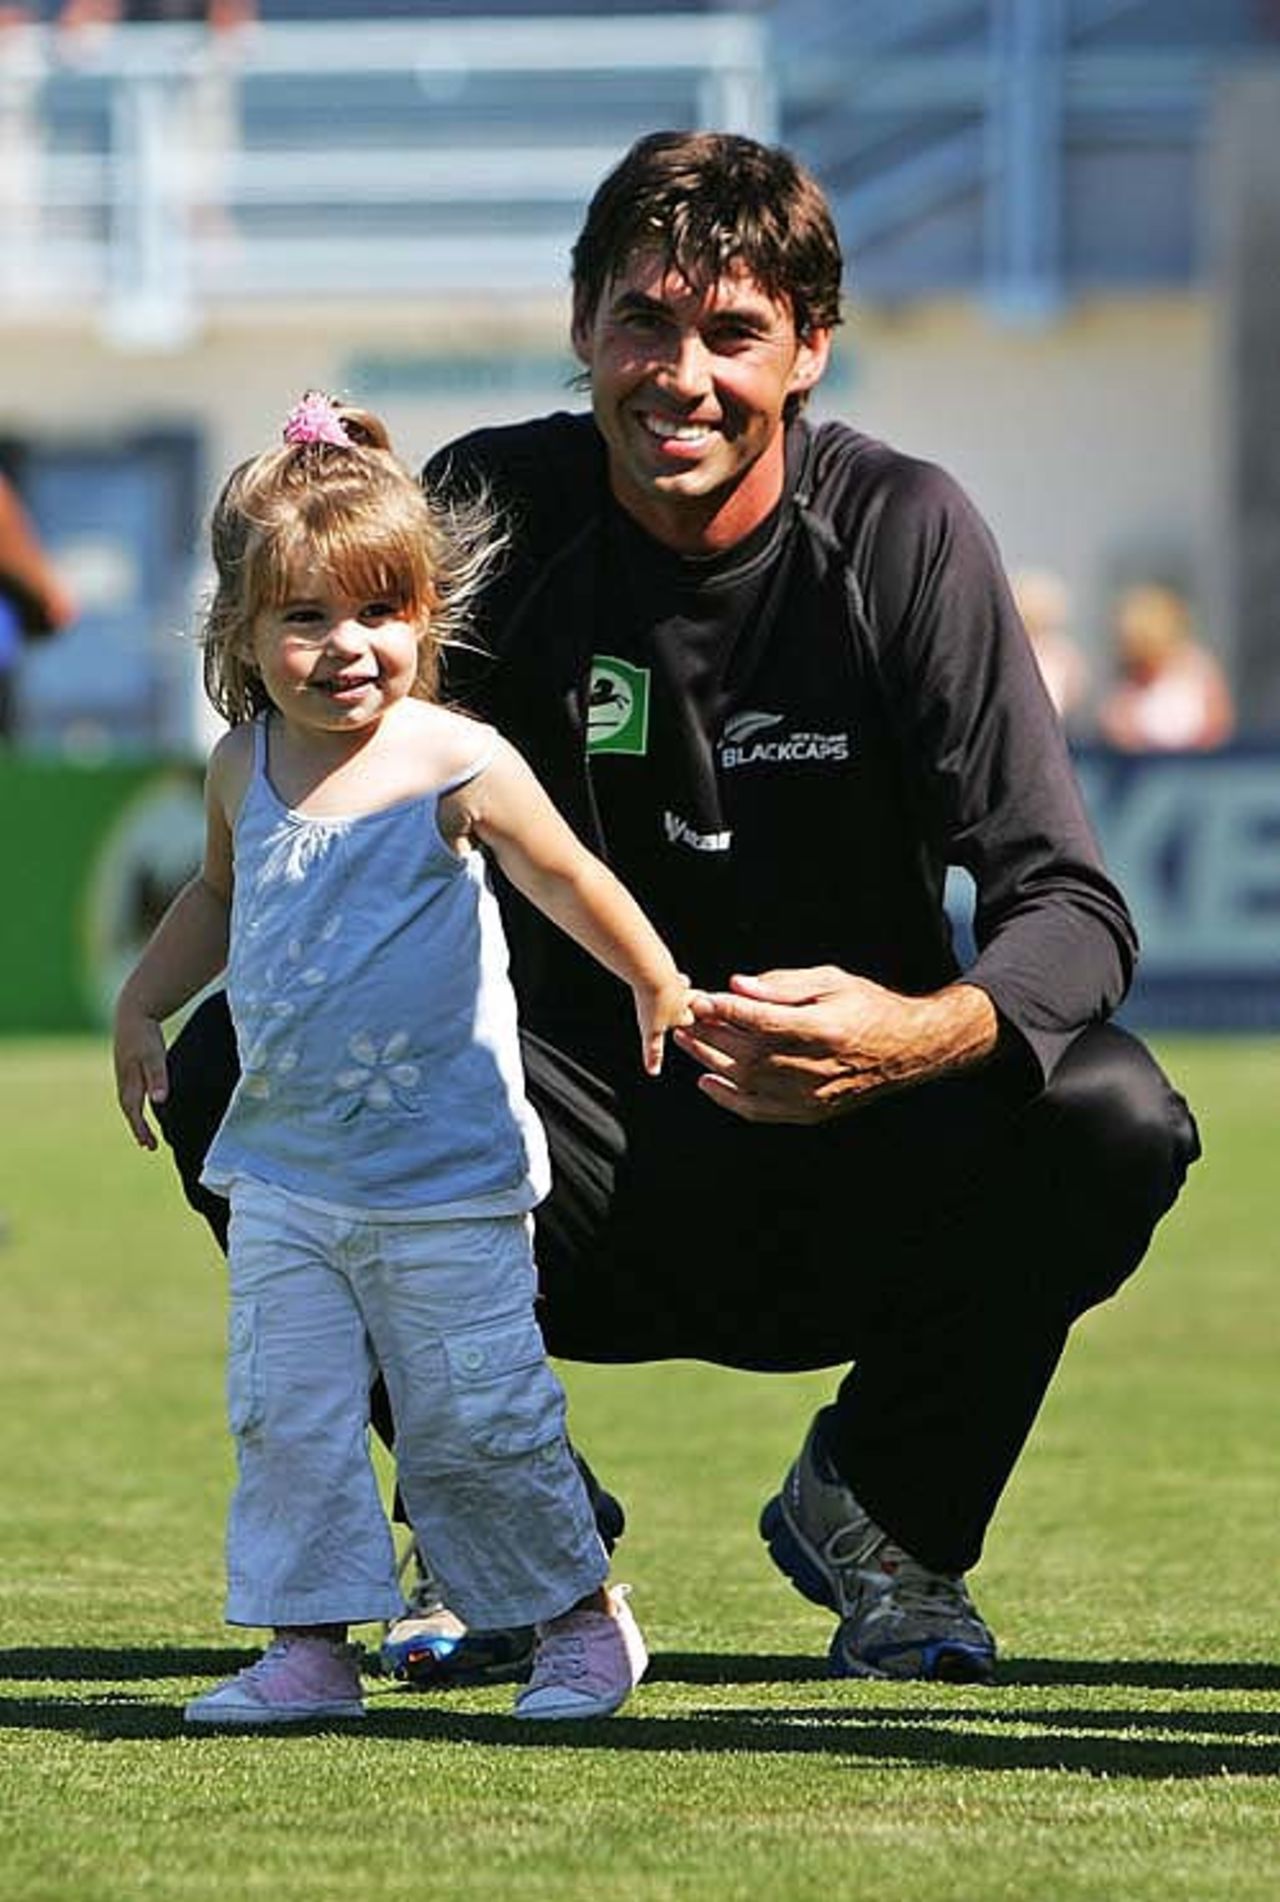 Stephen Fleming spends time with his daughter Tayla, New Zealand v England, 3rd Test, Napier, 5th day, March 26, 2008